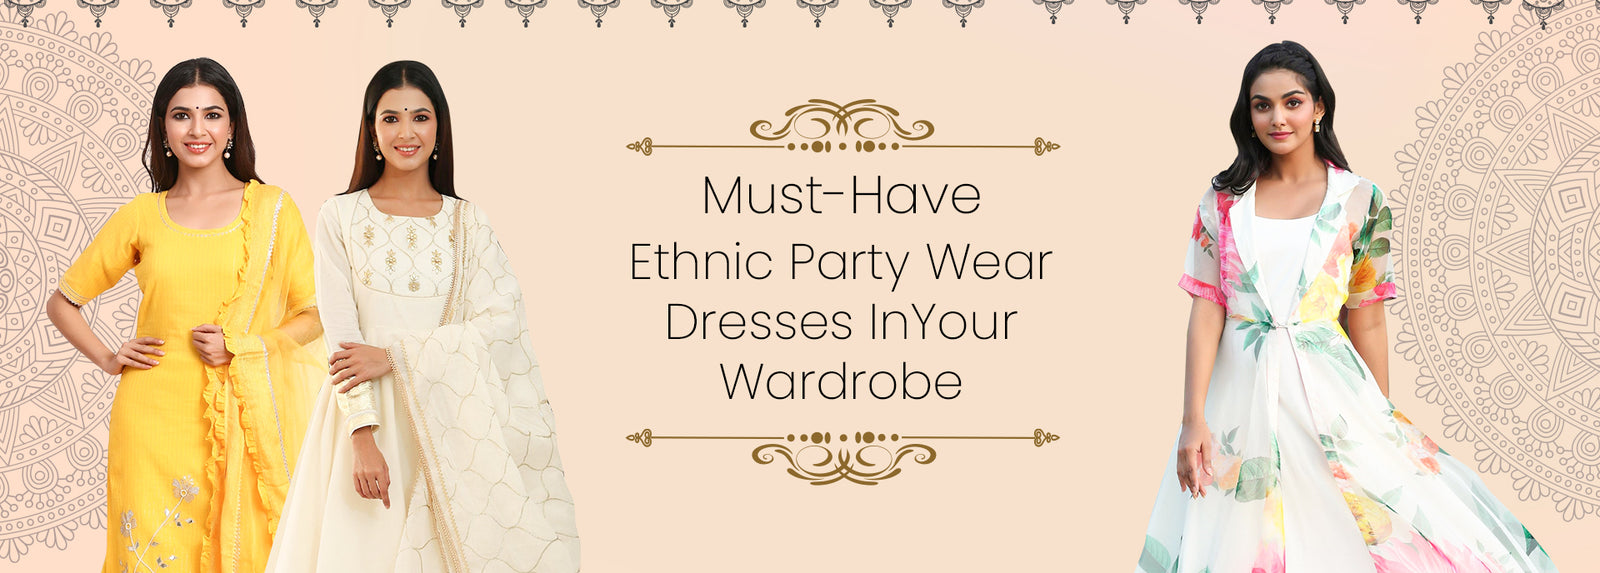 Ethnic Party Wear Dresses